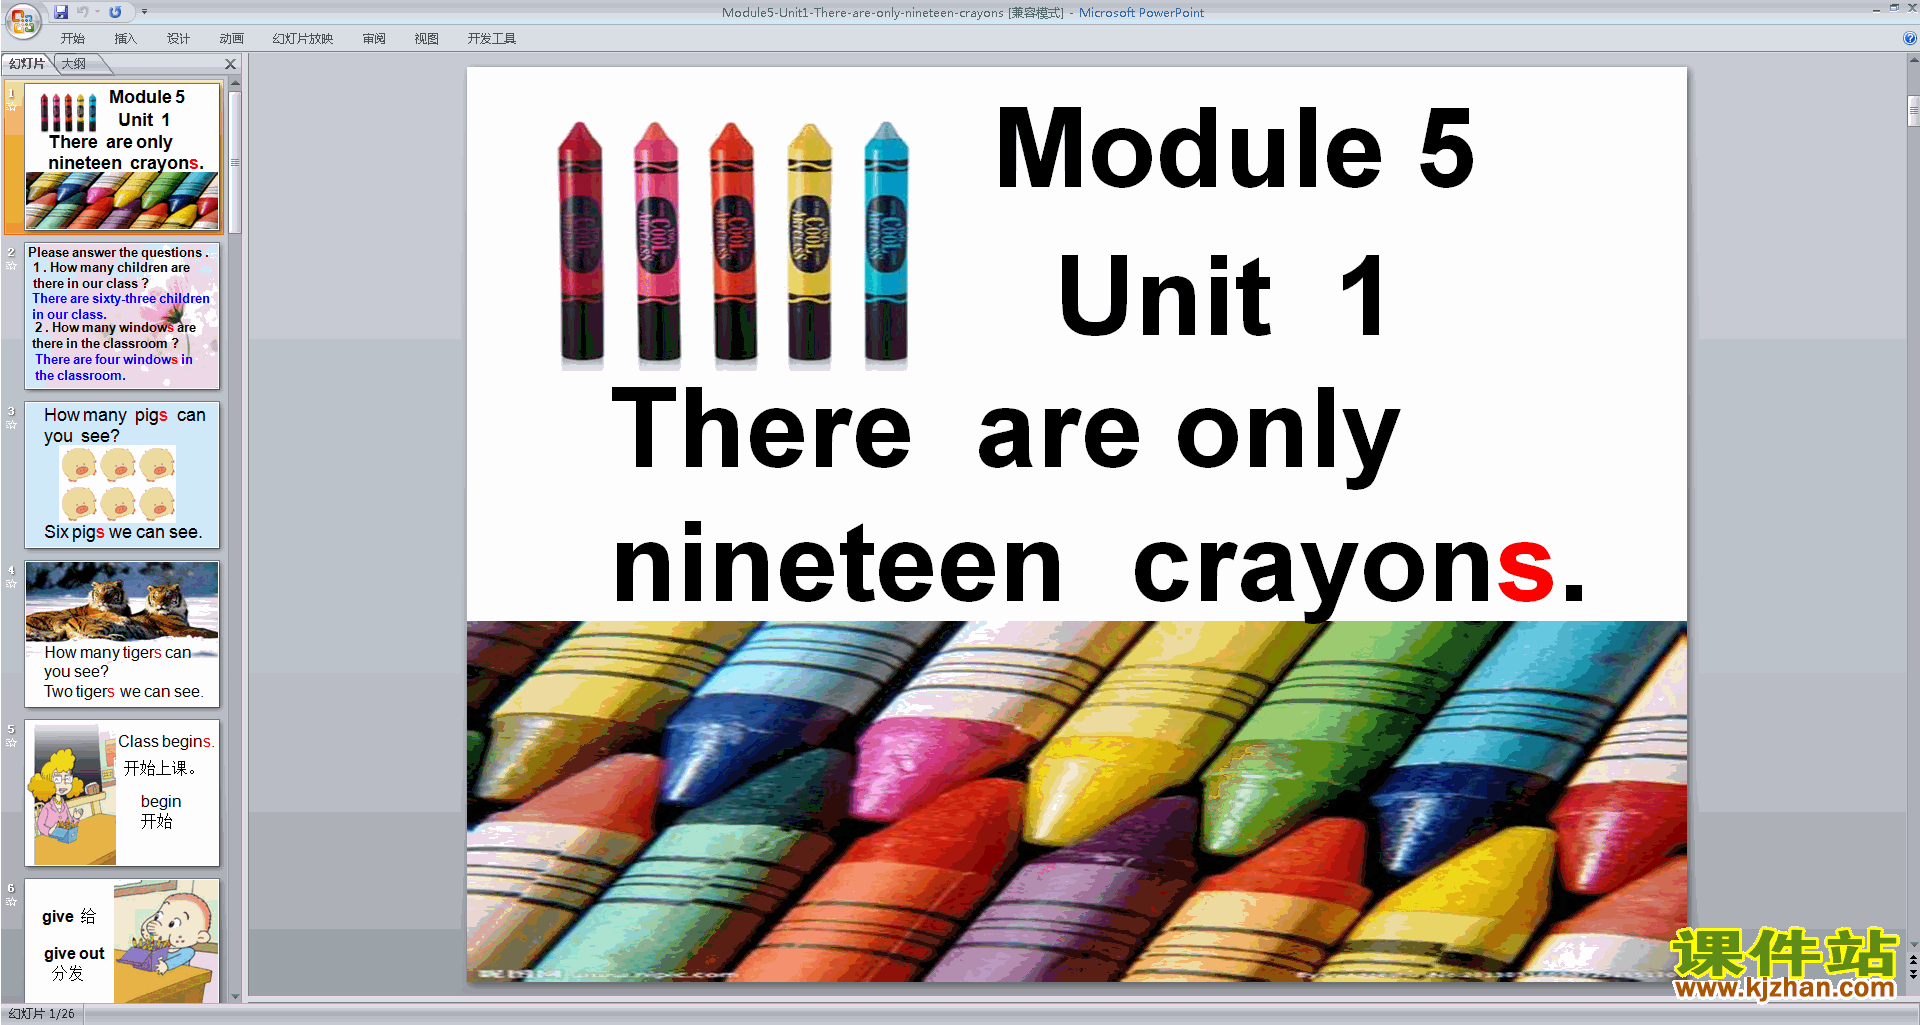 Module5 Unit1 There are only nineteen crayonspptμ